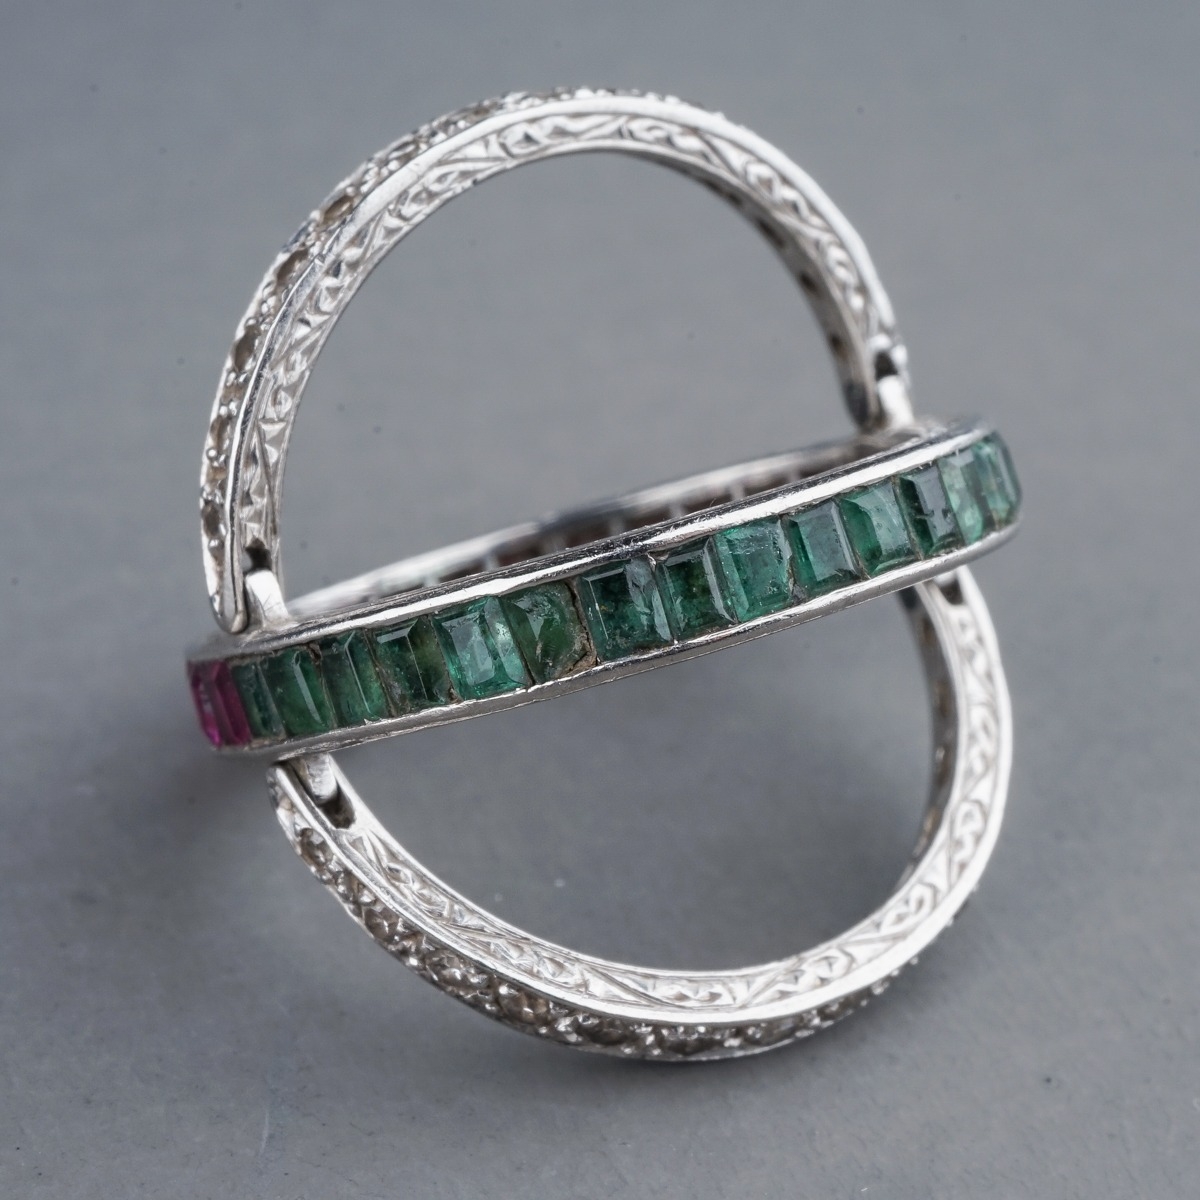 An Art Deco platinum diamond ruby and emerald swivel or flip ring, set with calibre cut rubies and - Image 6 of 6